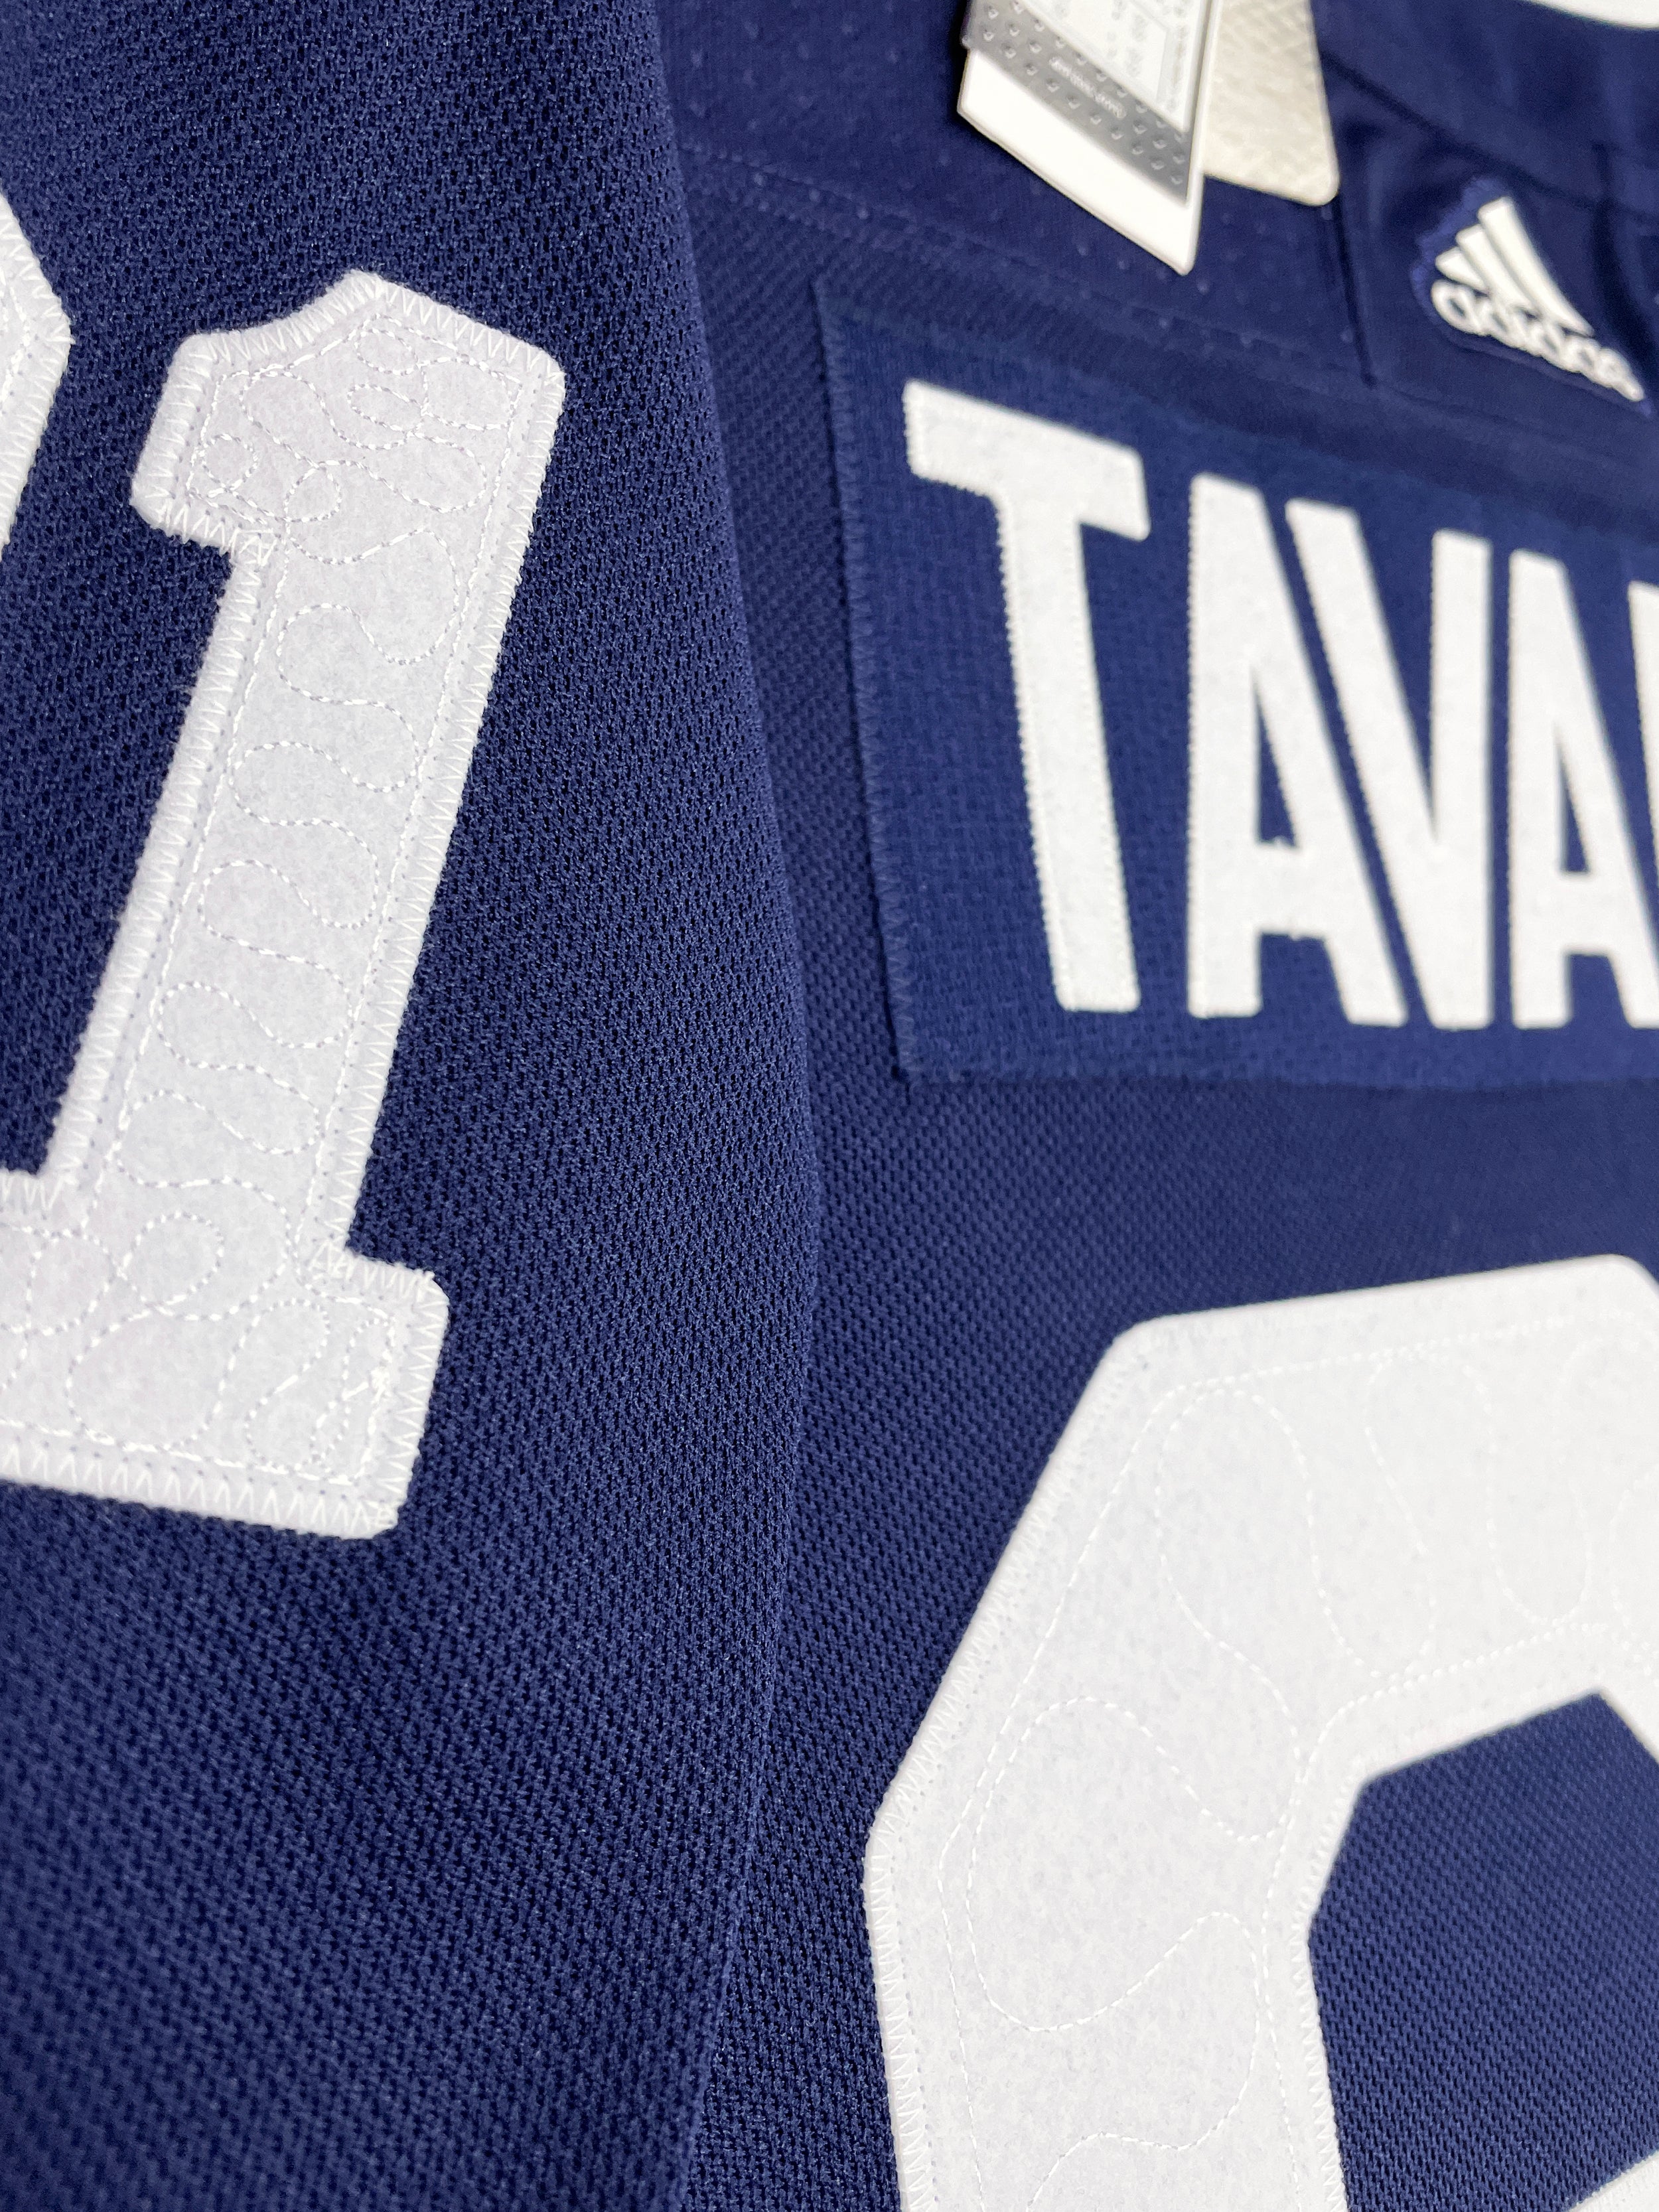 Toronto Maple Leafs on X: It's time to update your @MapleLeafs jersey  collection. @RealSports has 15% off @adidashockey jerseys for Leafs Nation  members. CODE:   / X